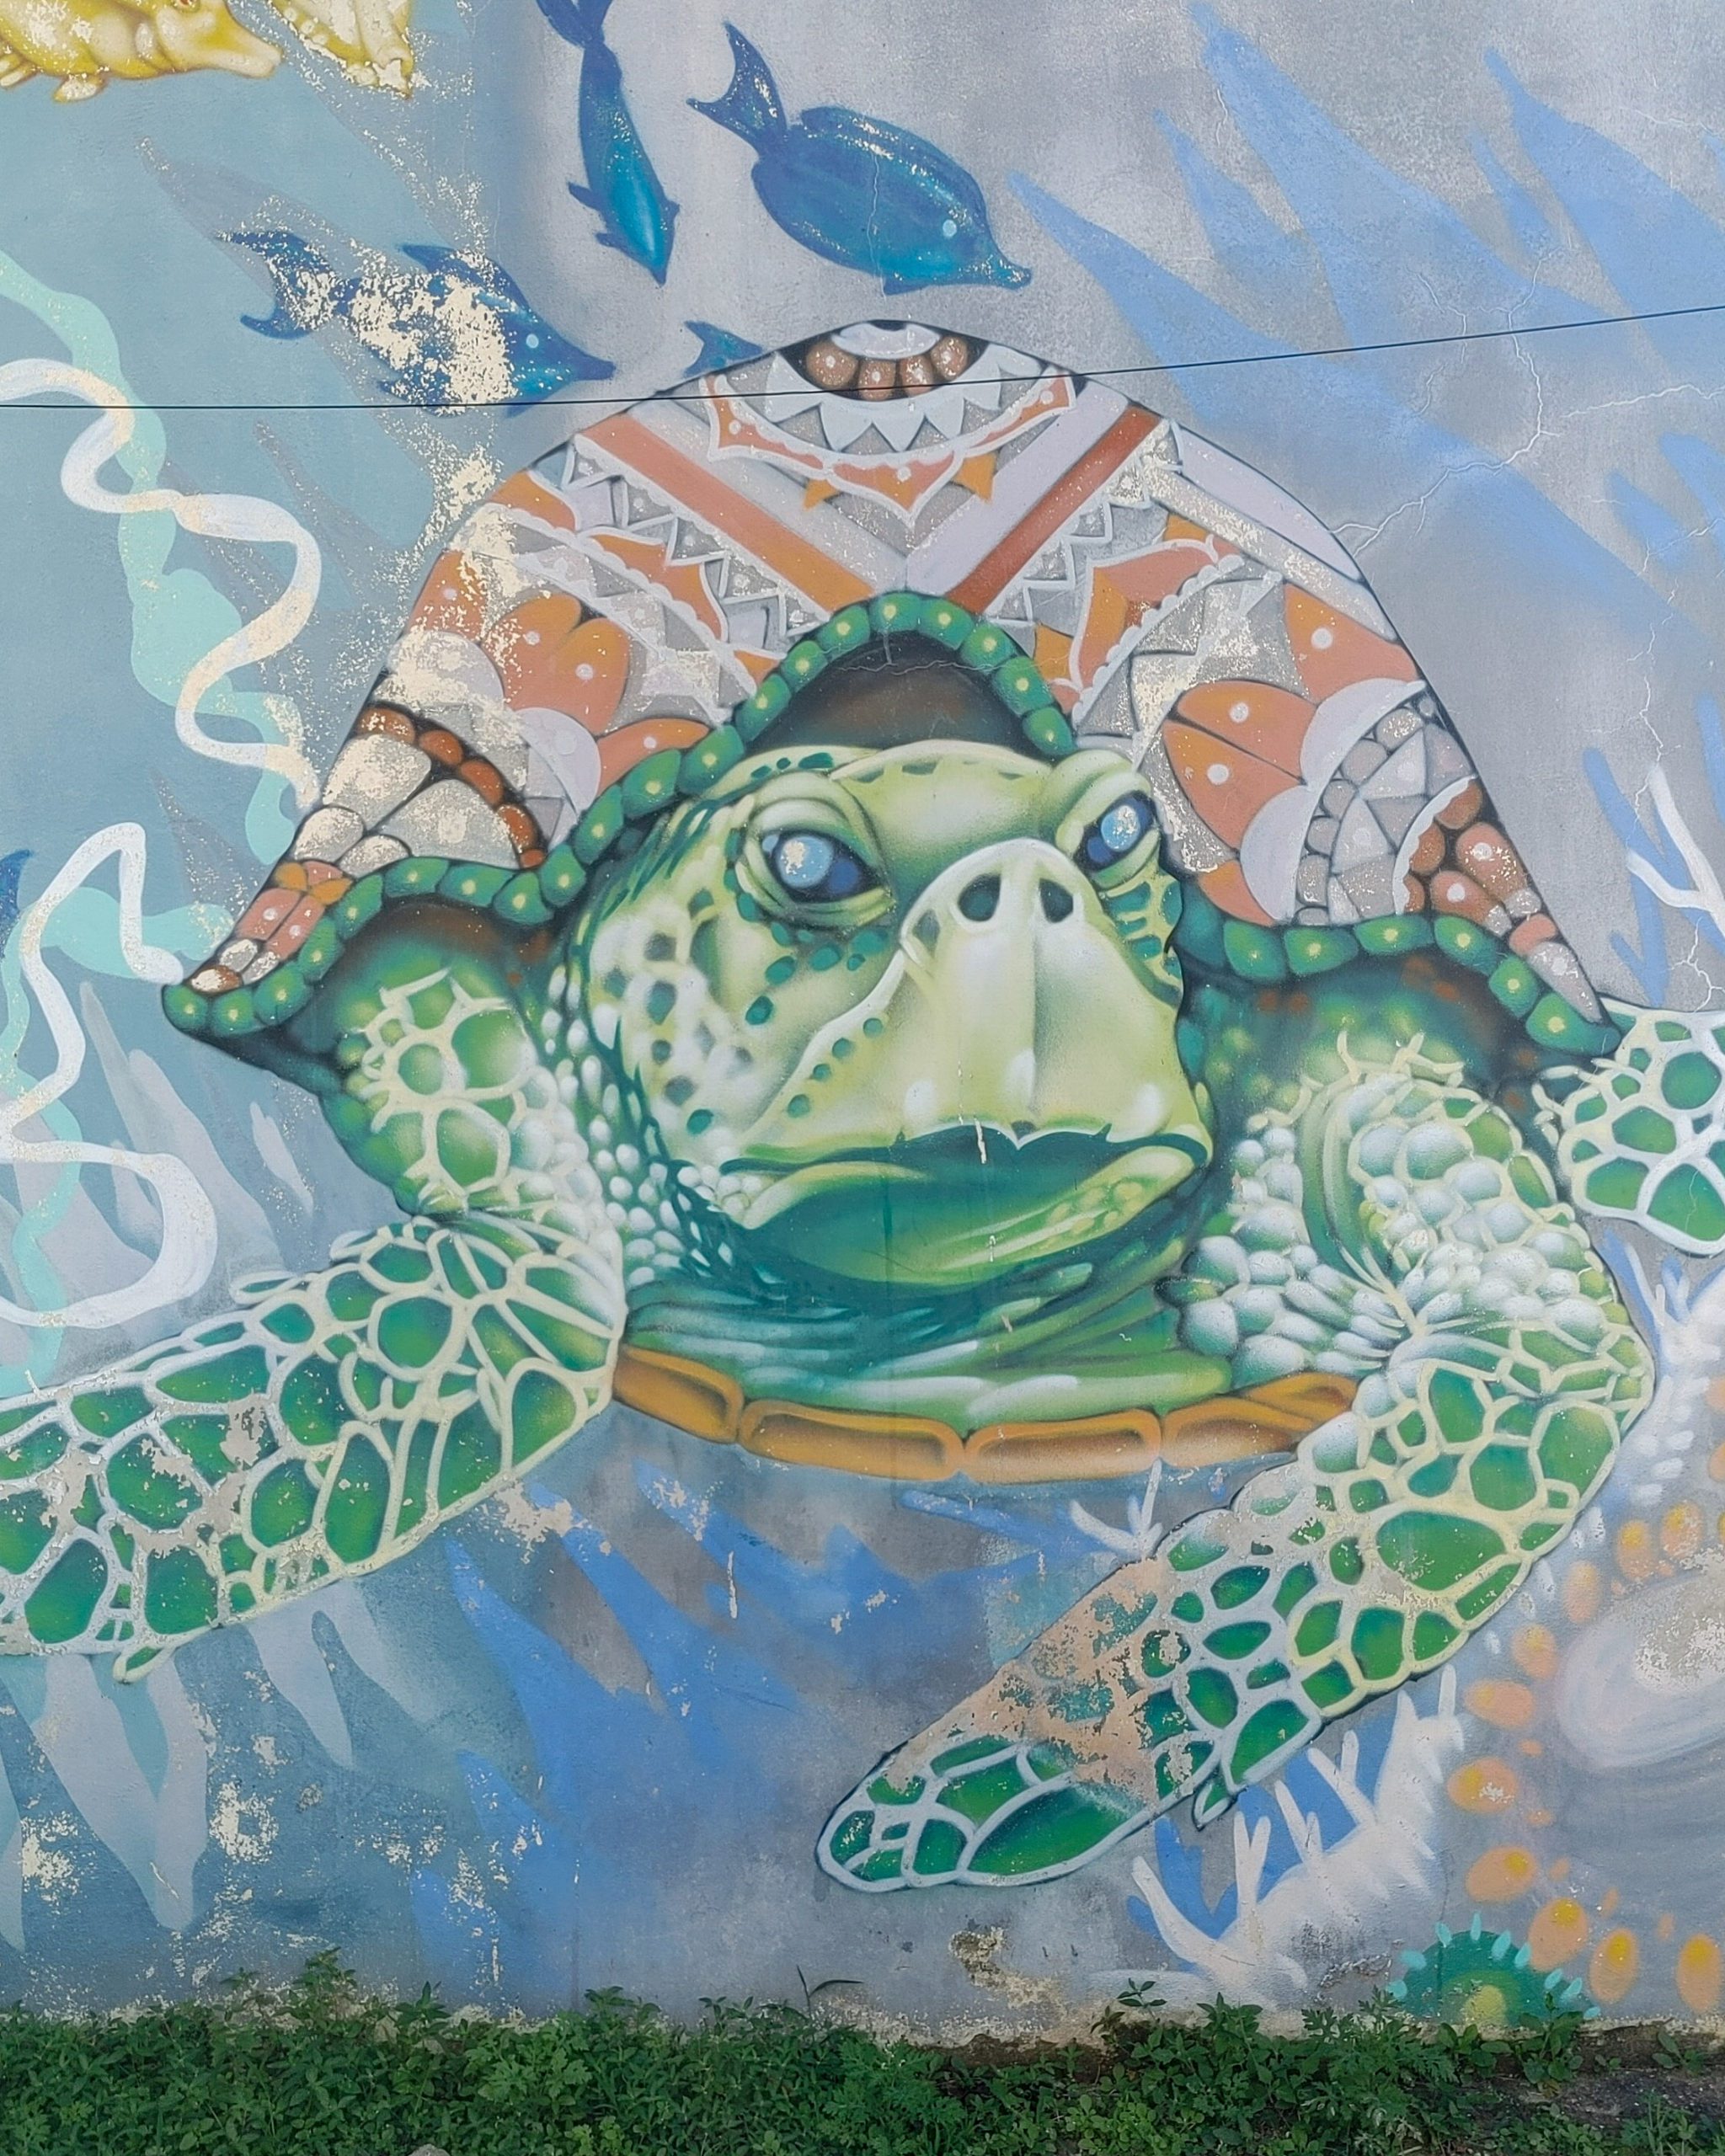 Street art in tulum. Affordable things to do in Tulum